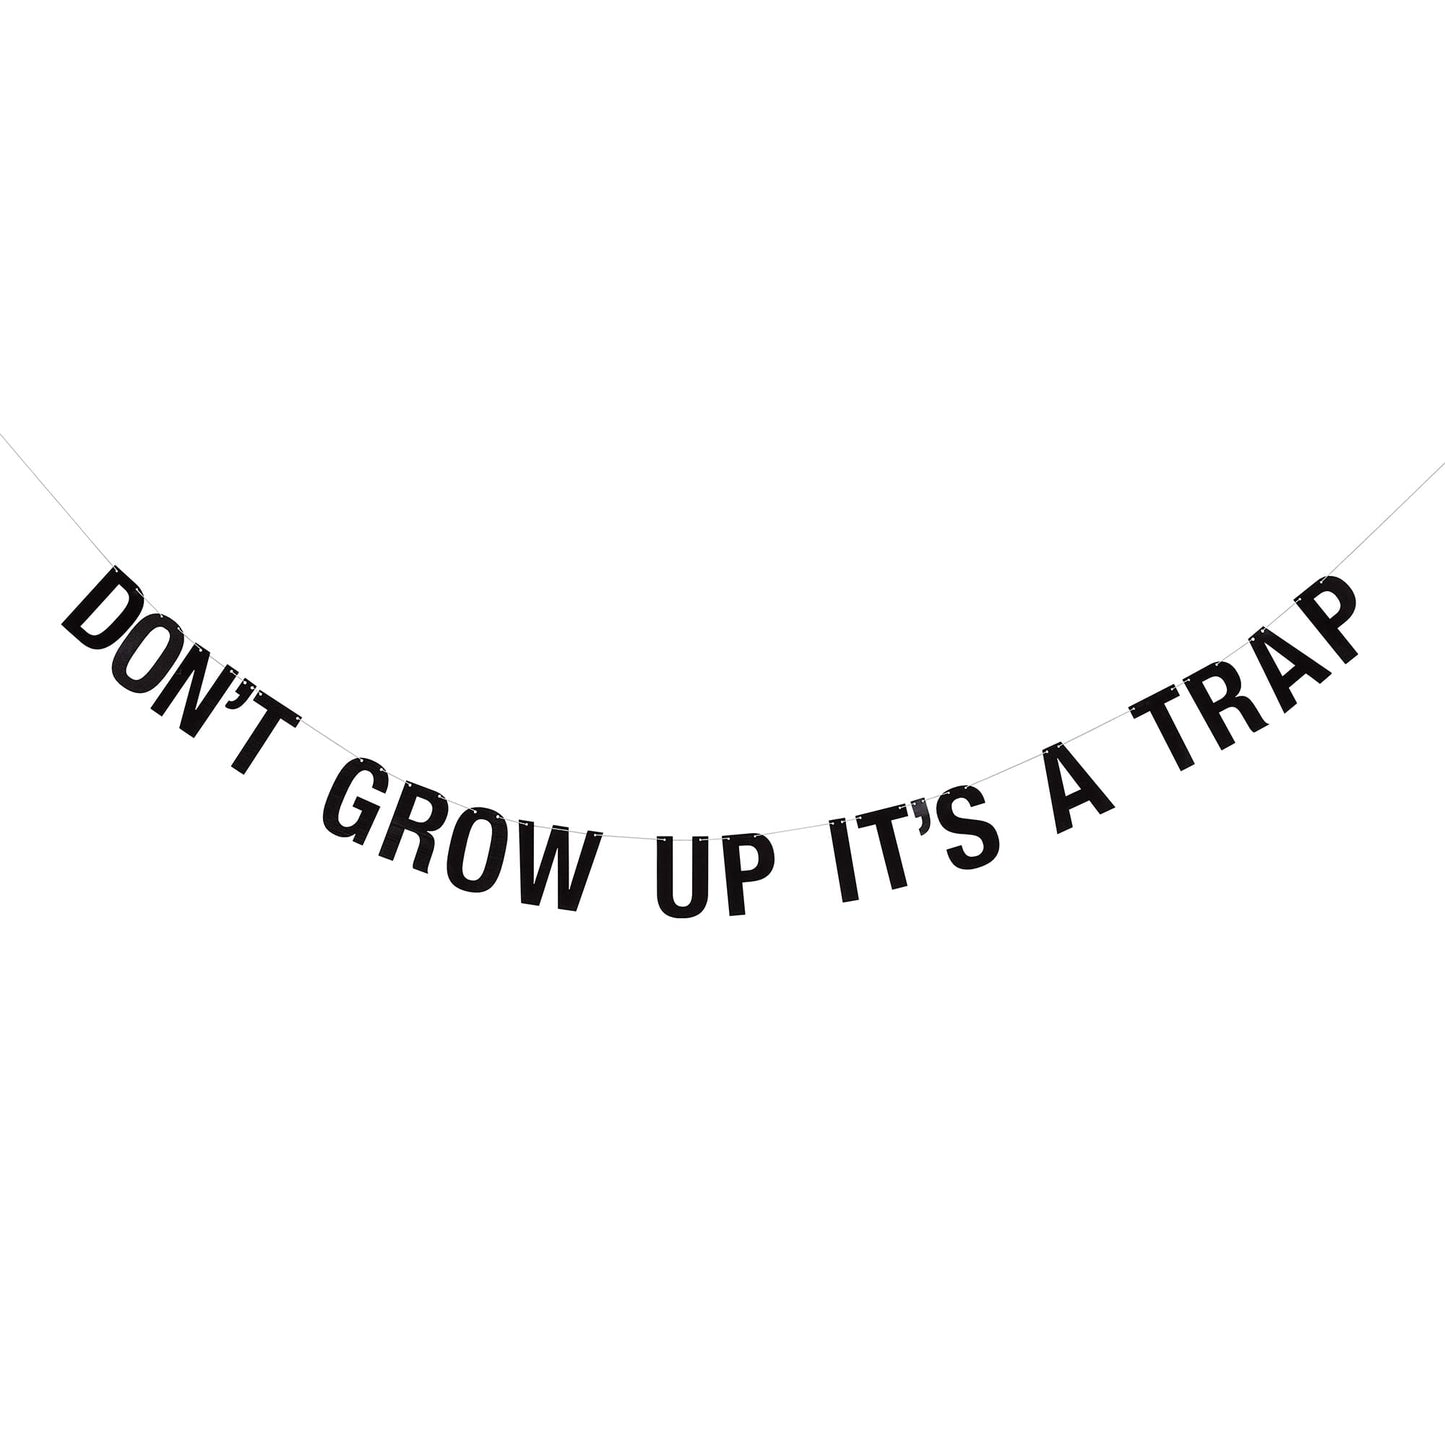 Garland 'Don't Grow Up It's A Trap'